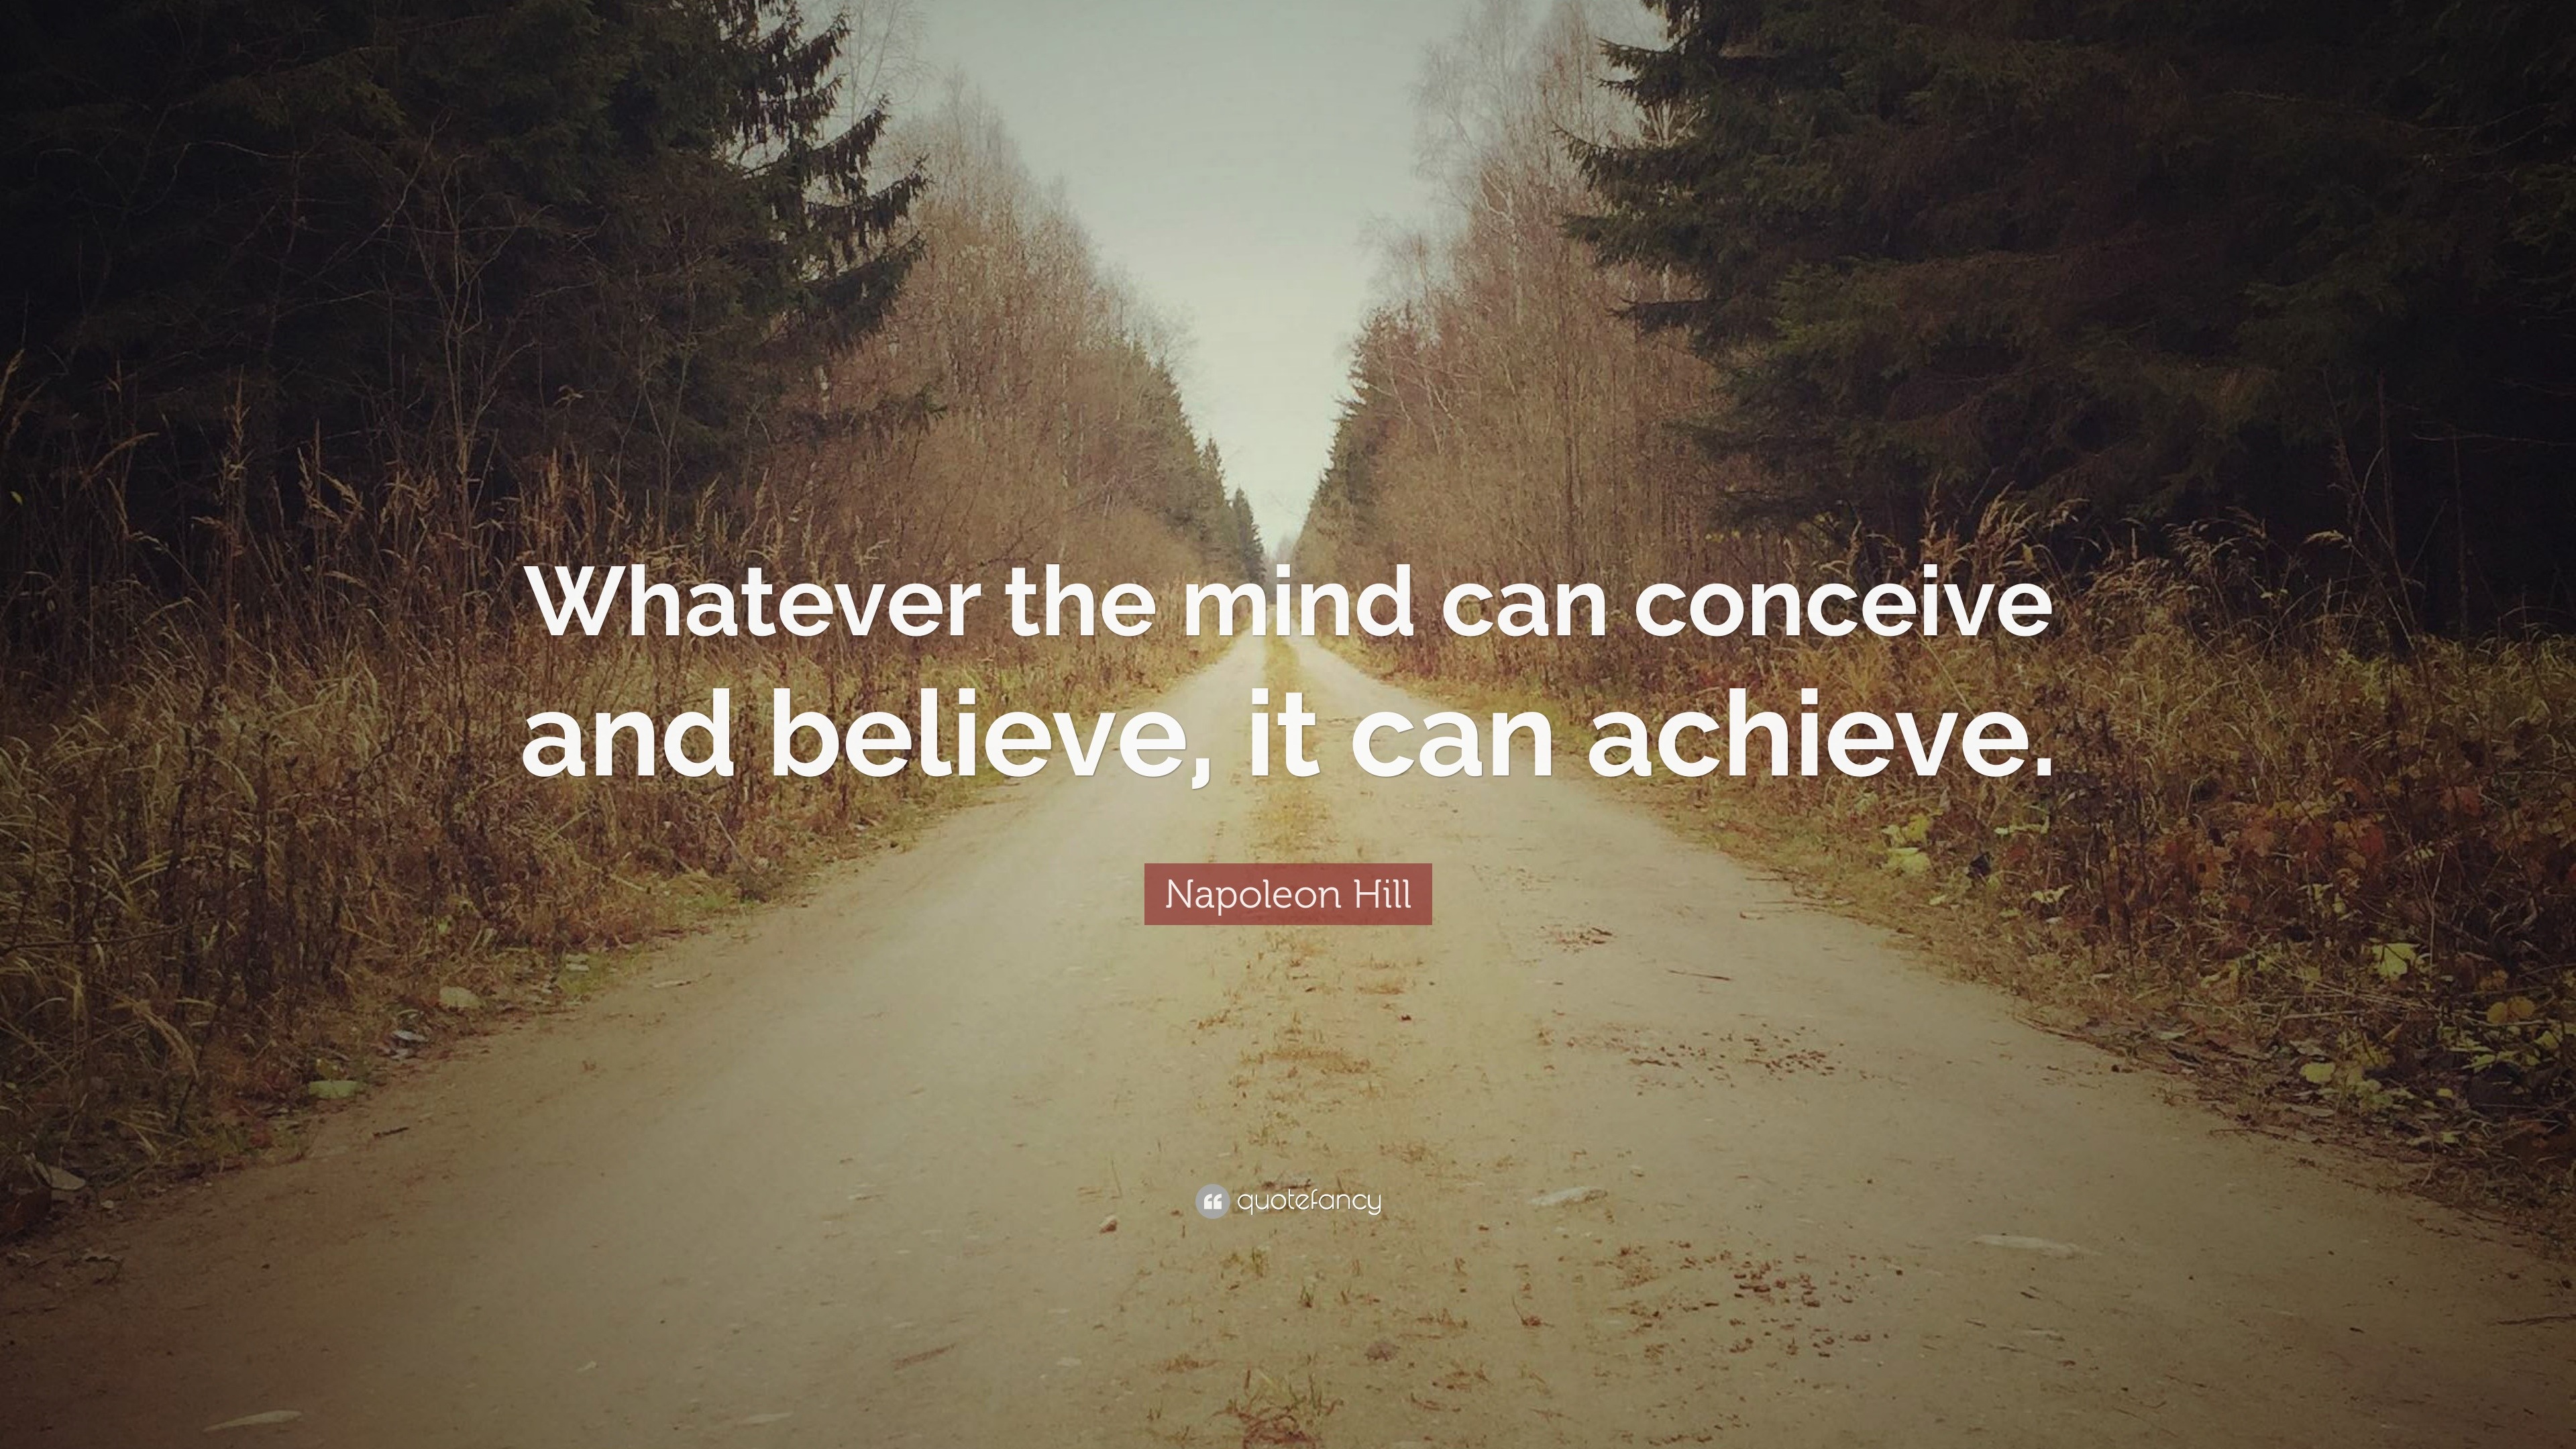 Napoleon Hill Quote: “Whatever the mind can conceive and believe, it